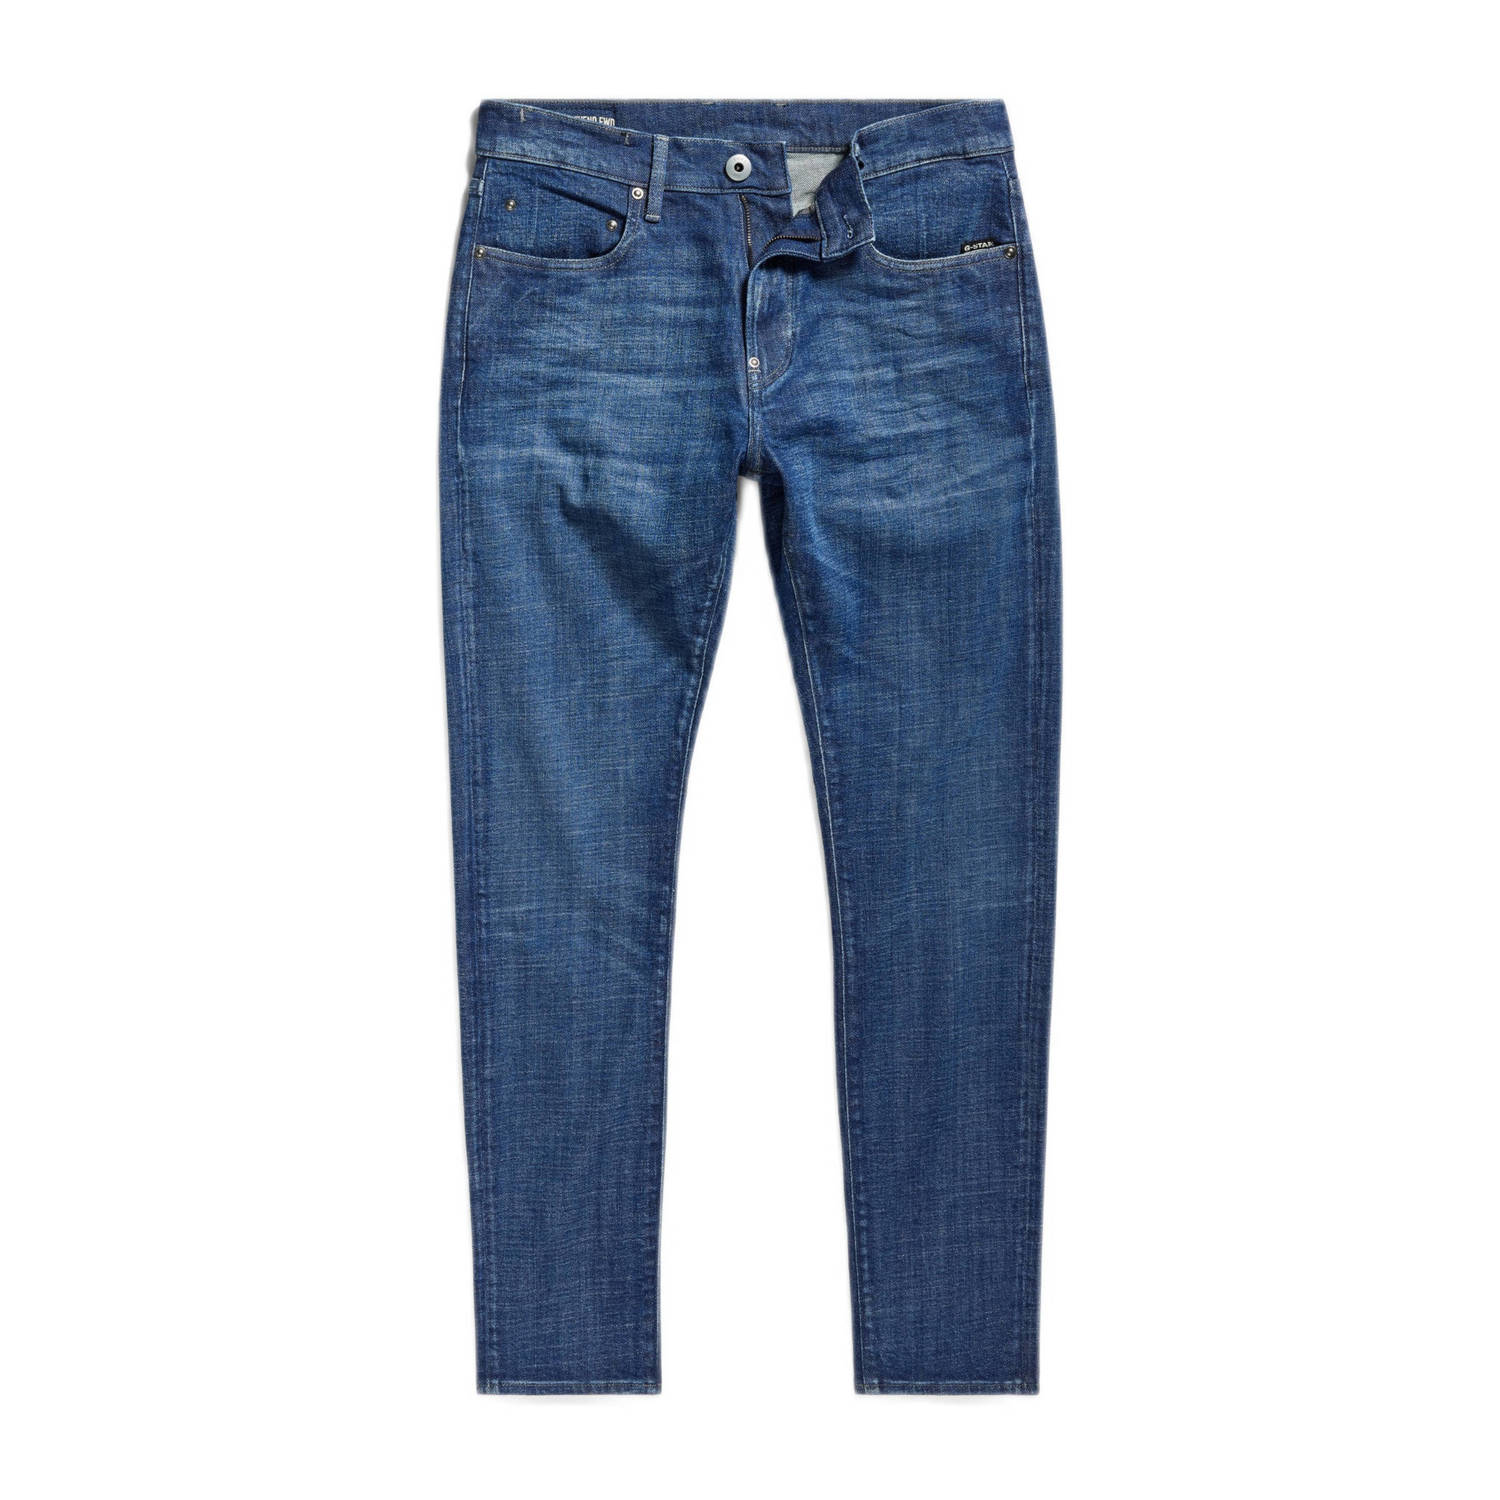 G-Star RAW Revend FWD skinny jeans faded blue copen